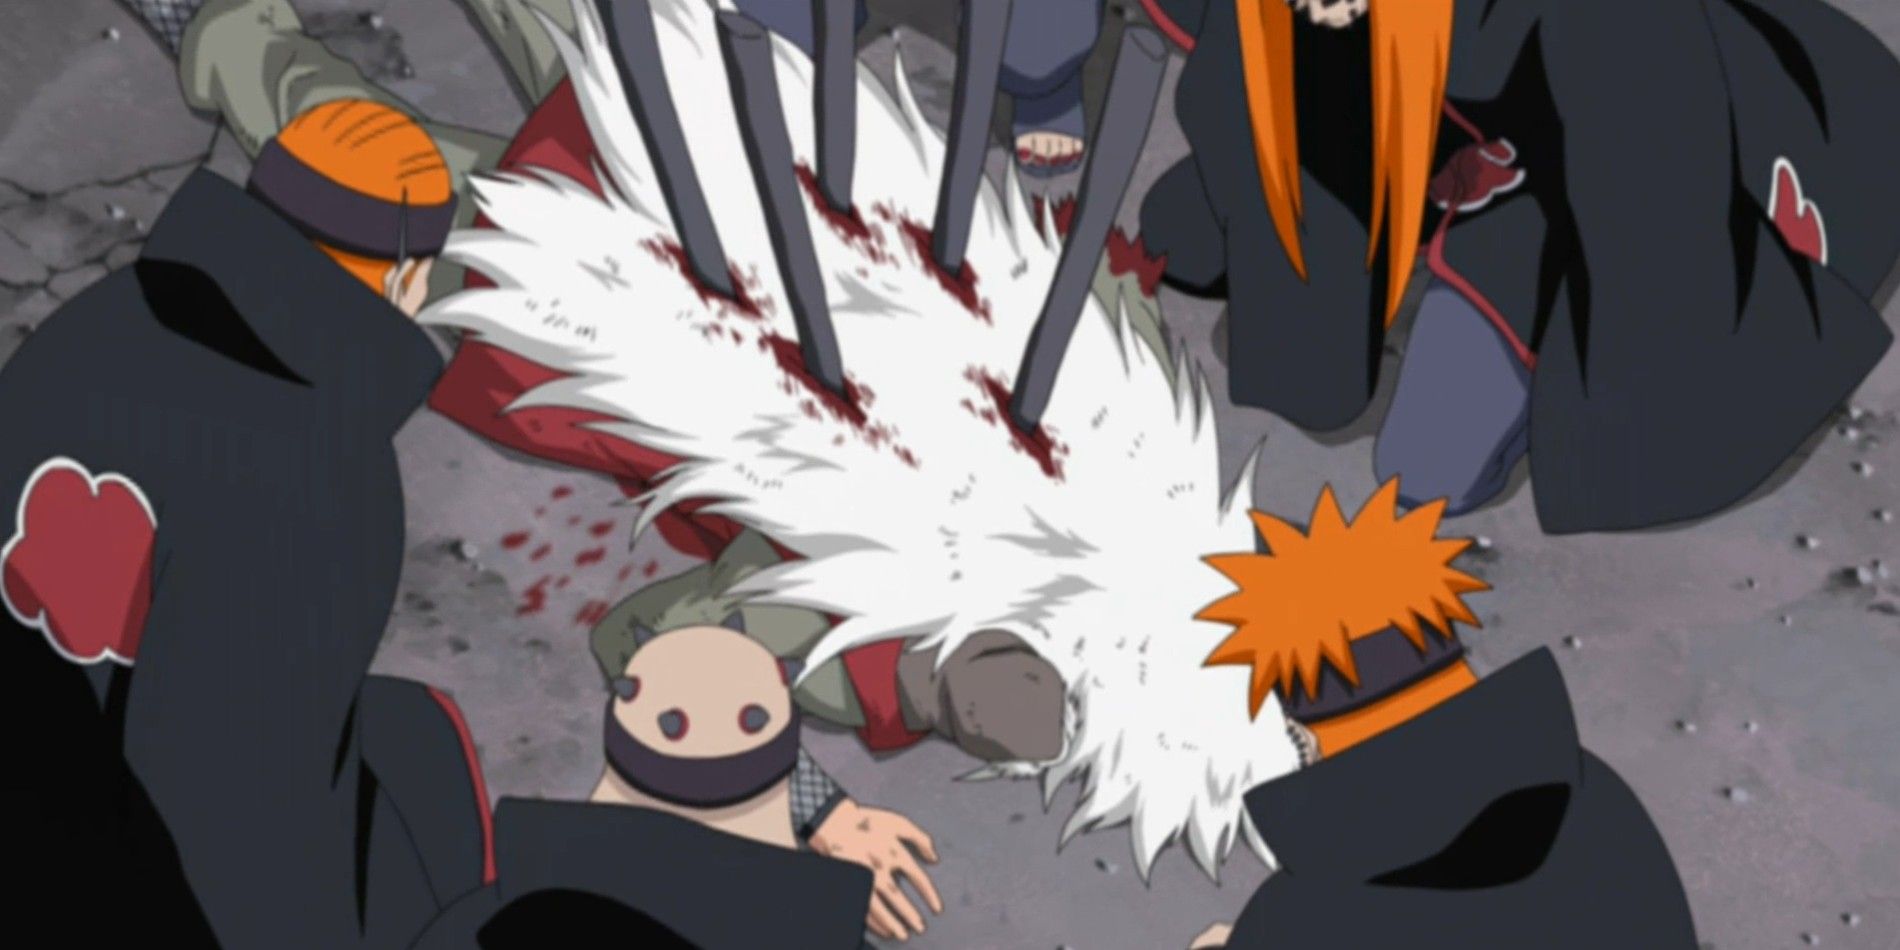 Screenshot from Naruto Shippuden anime show Jiraiya laying on the ground with 5 black rods in his back while 5 versions of Pain surround him.